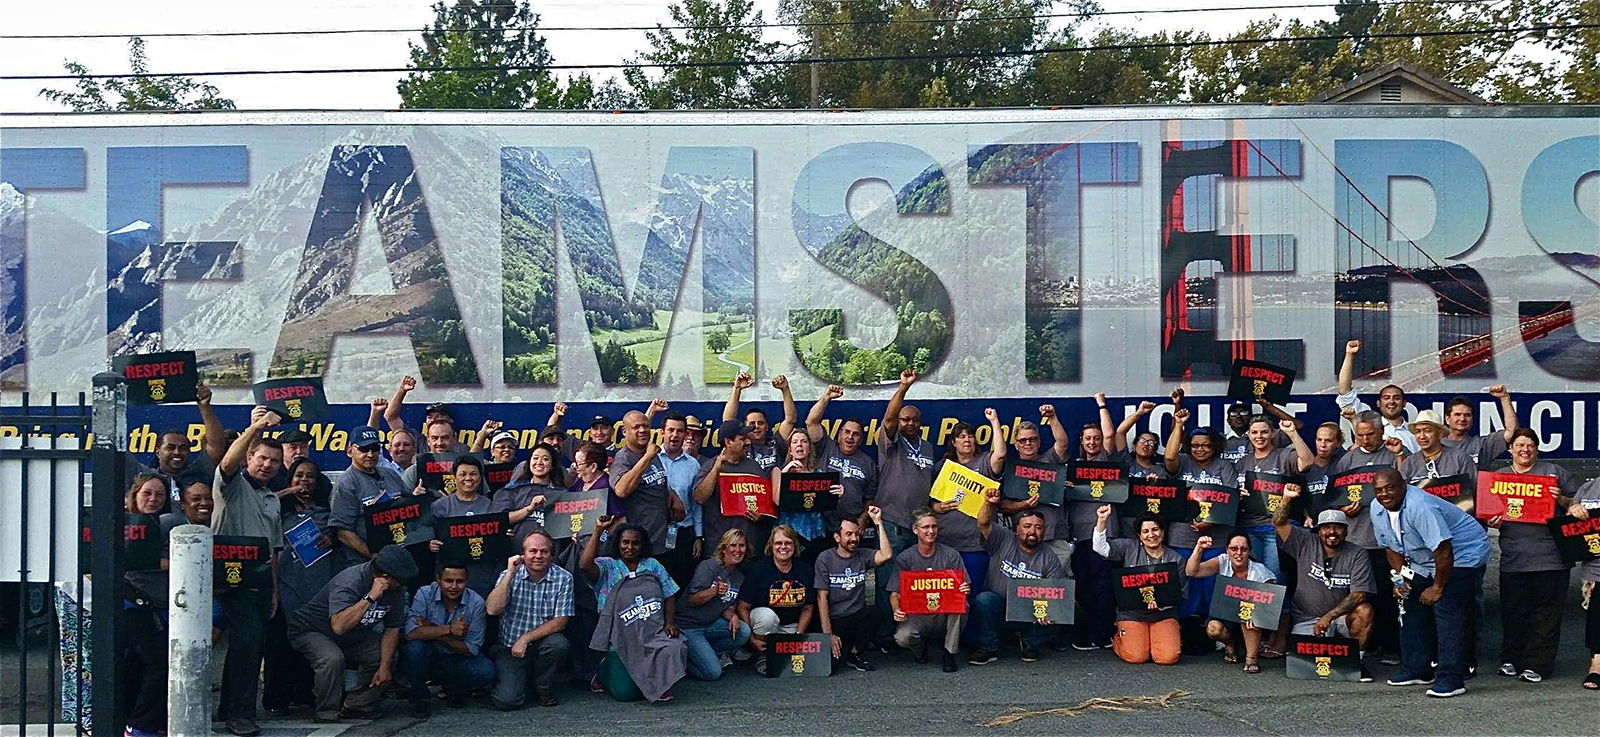 Photo of Teamsters in from of Teamster truck